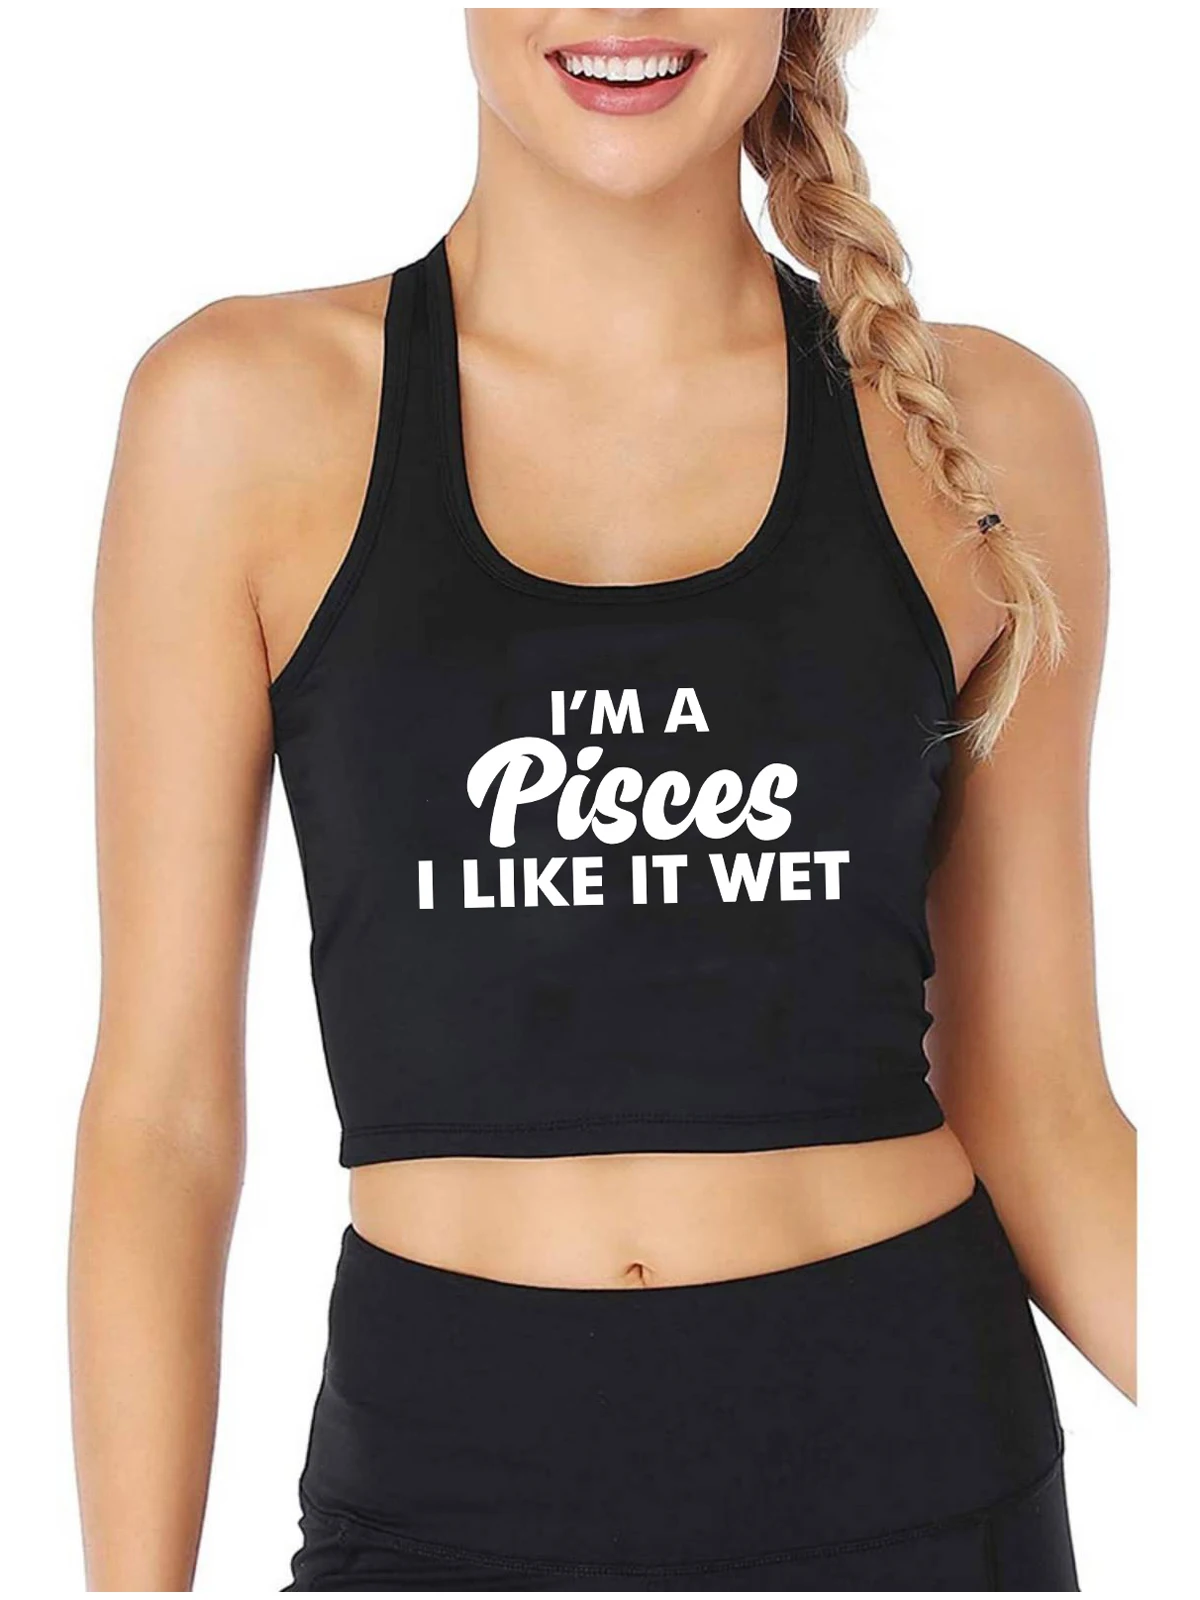 

Pisces Like Wet Design Cotton Sexy Slim Fit Crop Top Women's Humorous Flirtation Tank Tops Hot Girl Naughty Sports Camisole